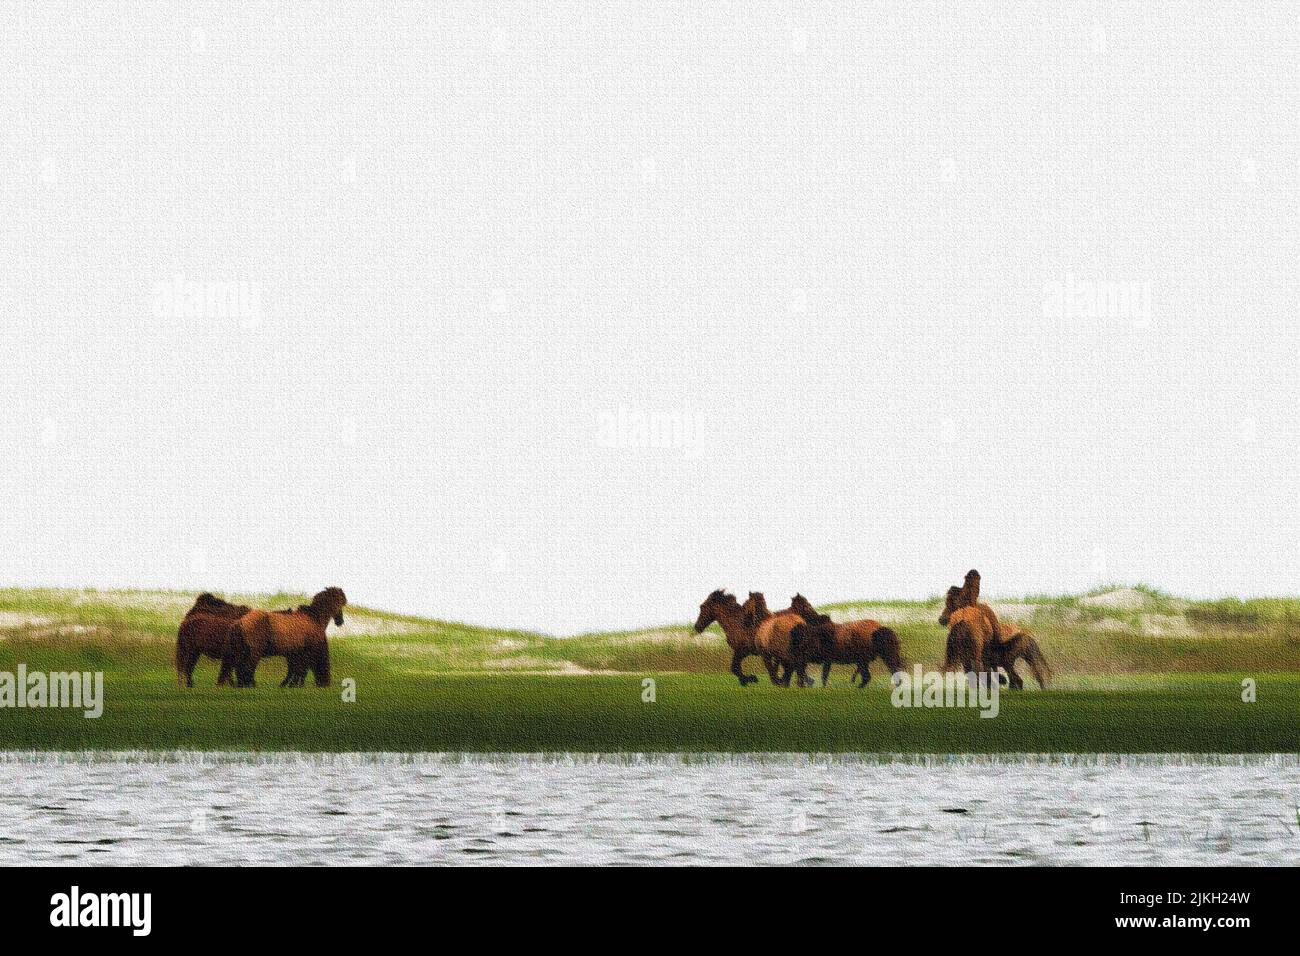 Band of horses - stallions starting to chase each other on Rachel Carson Reserve, made up of Town Marsh, Carrot Island, Bird Shoal and Horse Island. Stock Photo